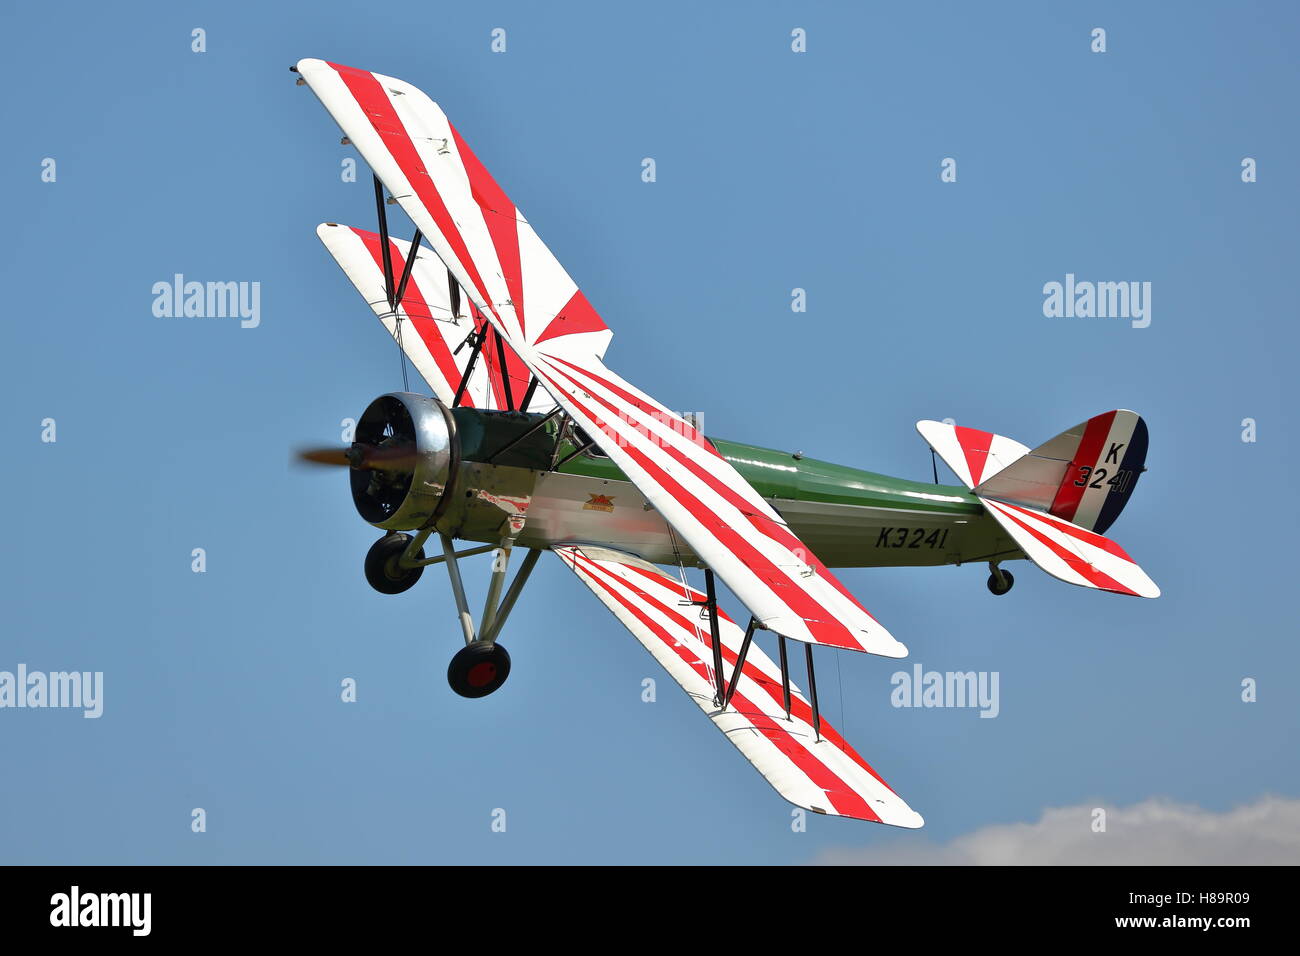 Shuttleworth Collection's Avro 621 Tutor G-AHSA at an Air Show at Old Warden, UK Stock Photo